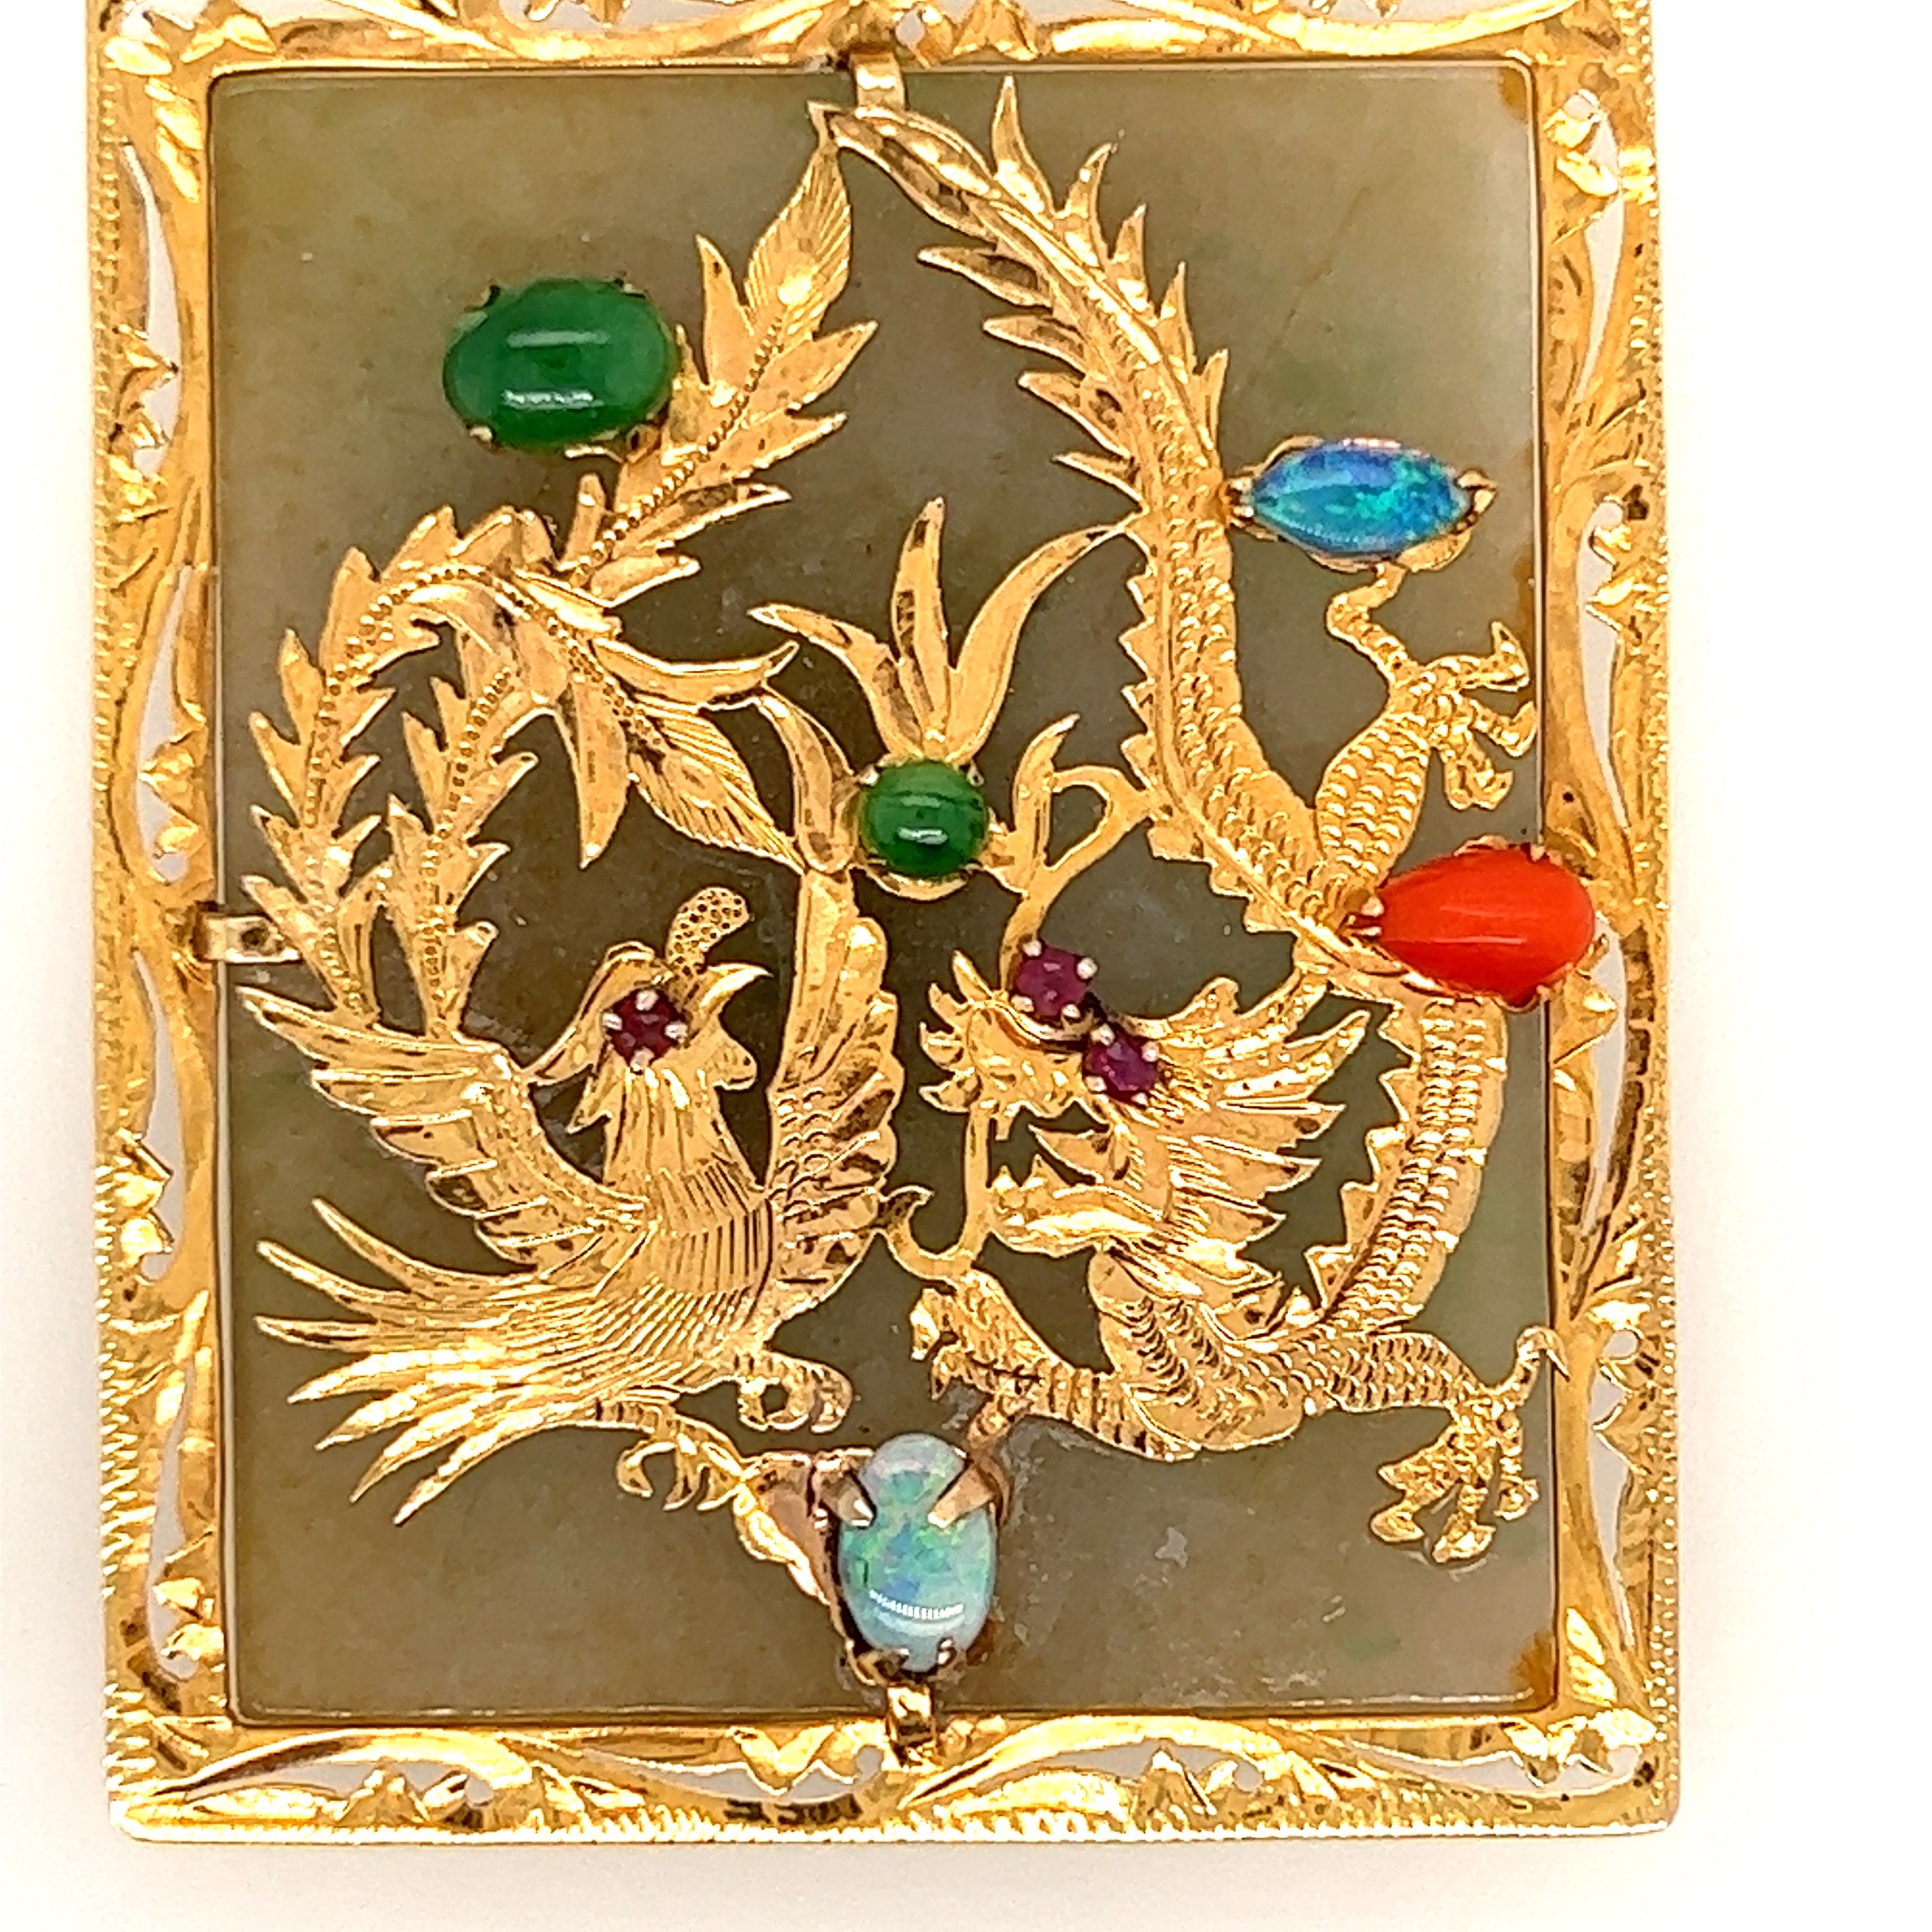 14ct Yellow Gold Jade, Opal, Red Coral, Ruby & Amethyst Handmade Pendant with two Engraved Dragons